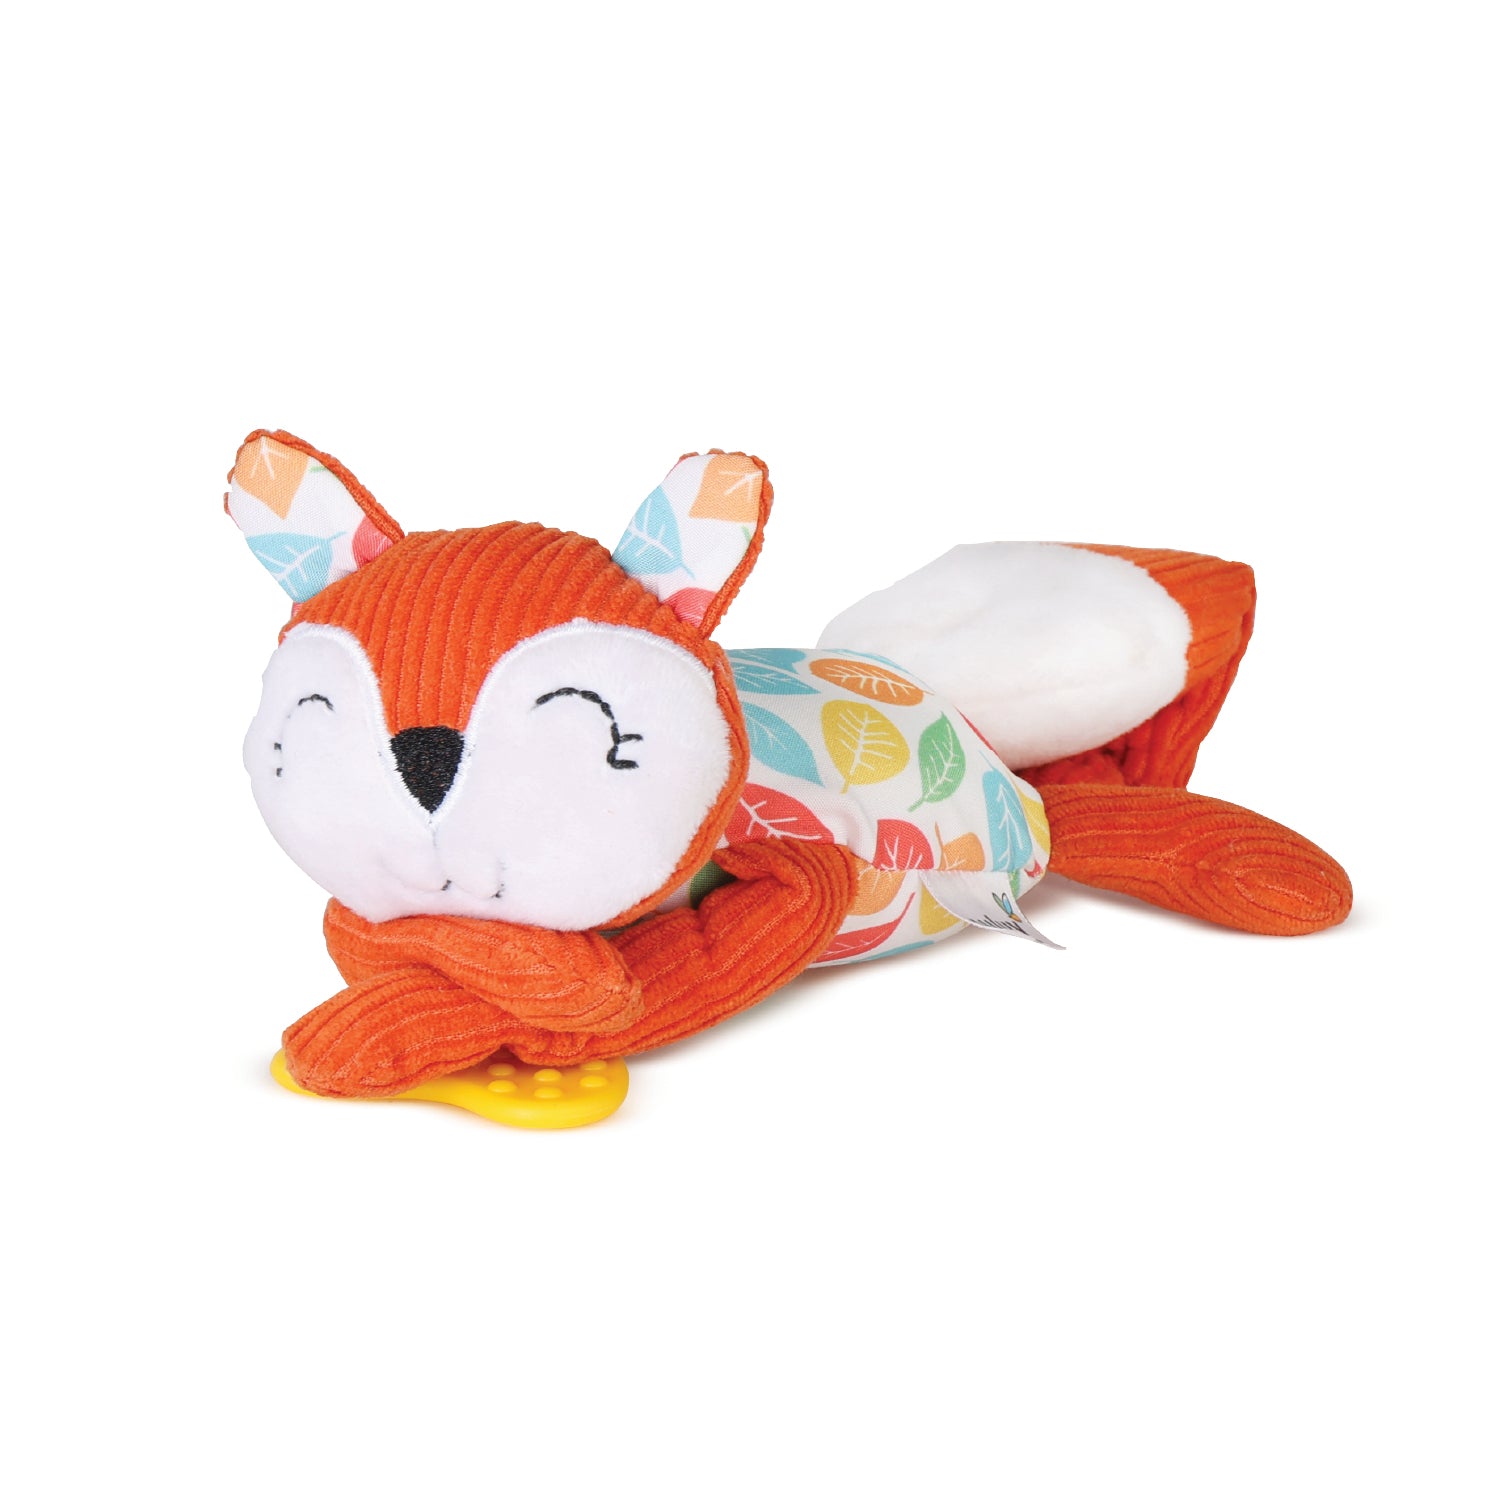 Nuluv Squirrel Soft Toy - Teether, Squeaky Crinkle Squirrel Play Toy For Baby 3 Months+